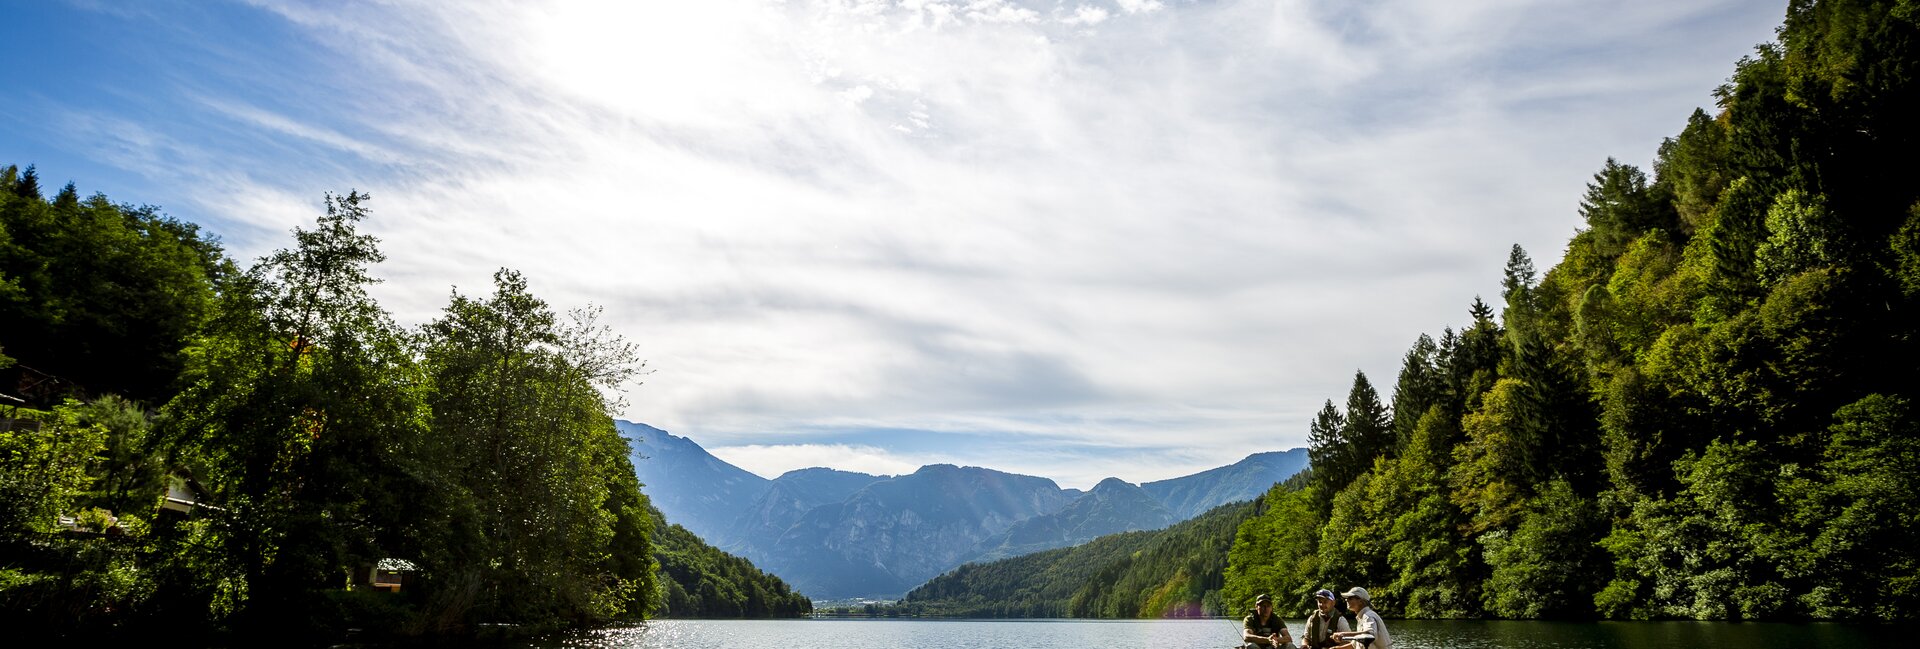 Lake Levico, lake surrounded by greenery where you can find peace and relaxation